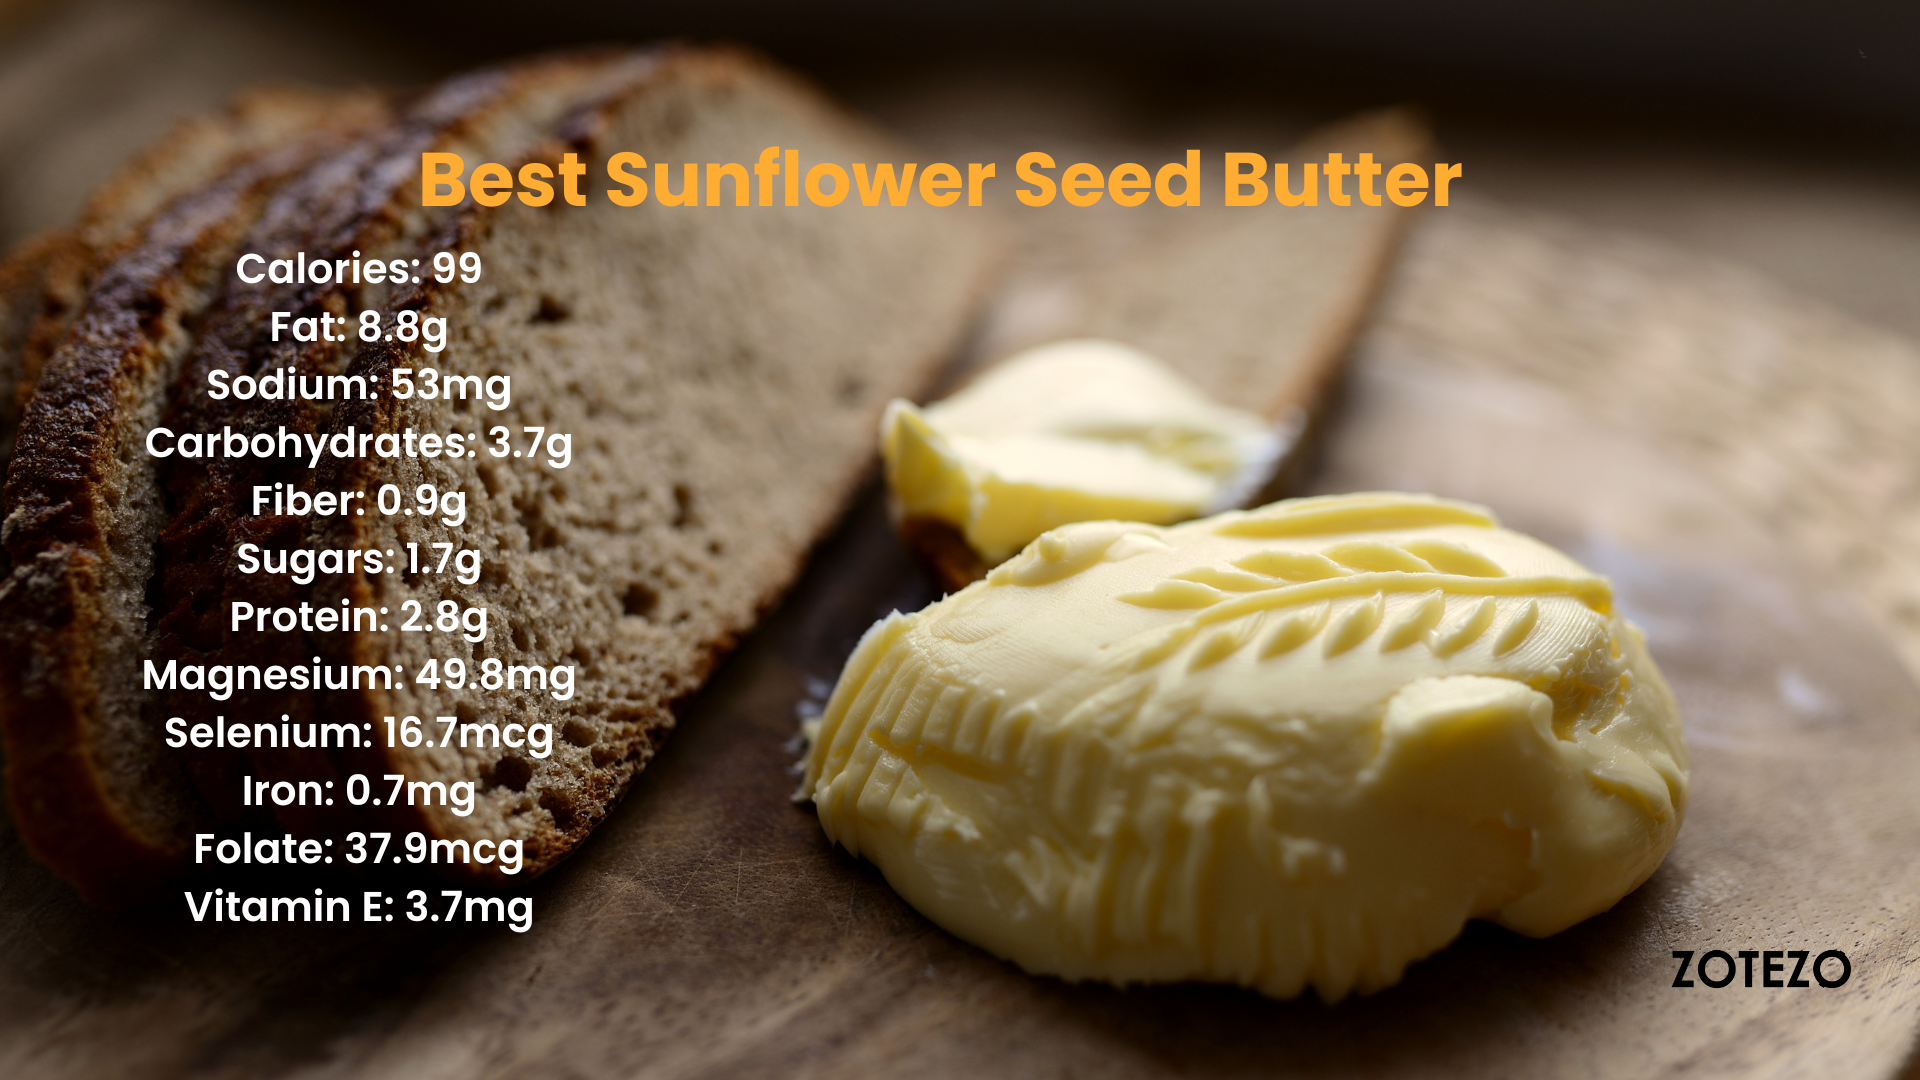 Sunflower Seed Butter in India